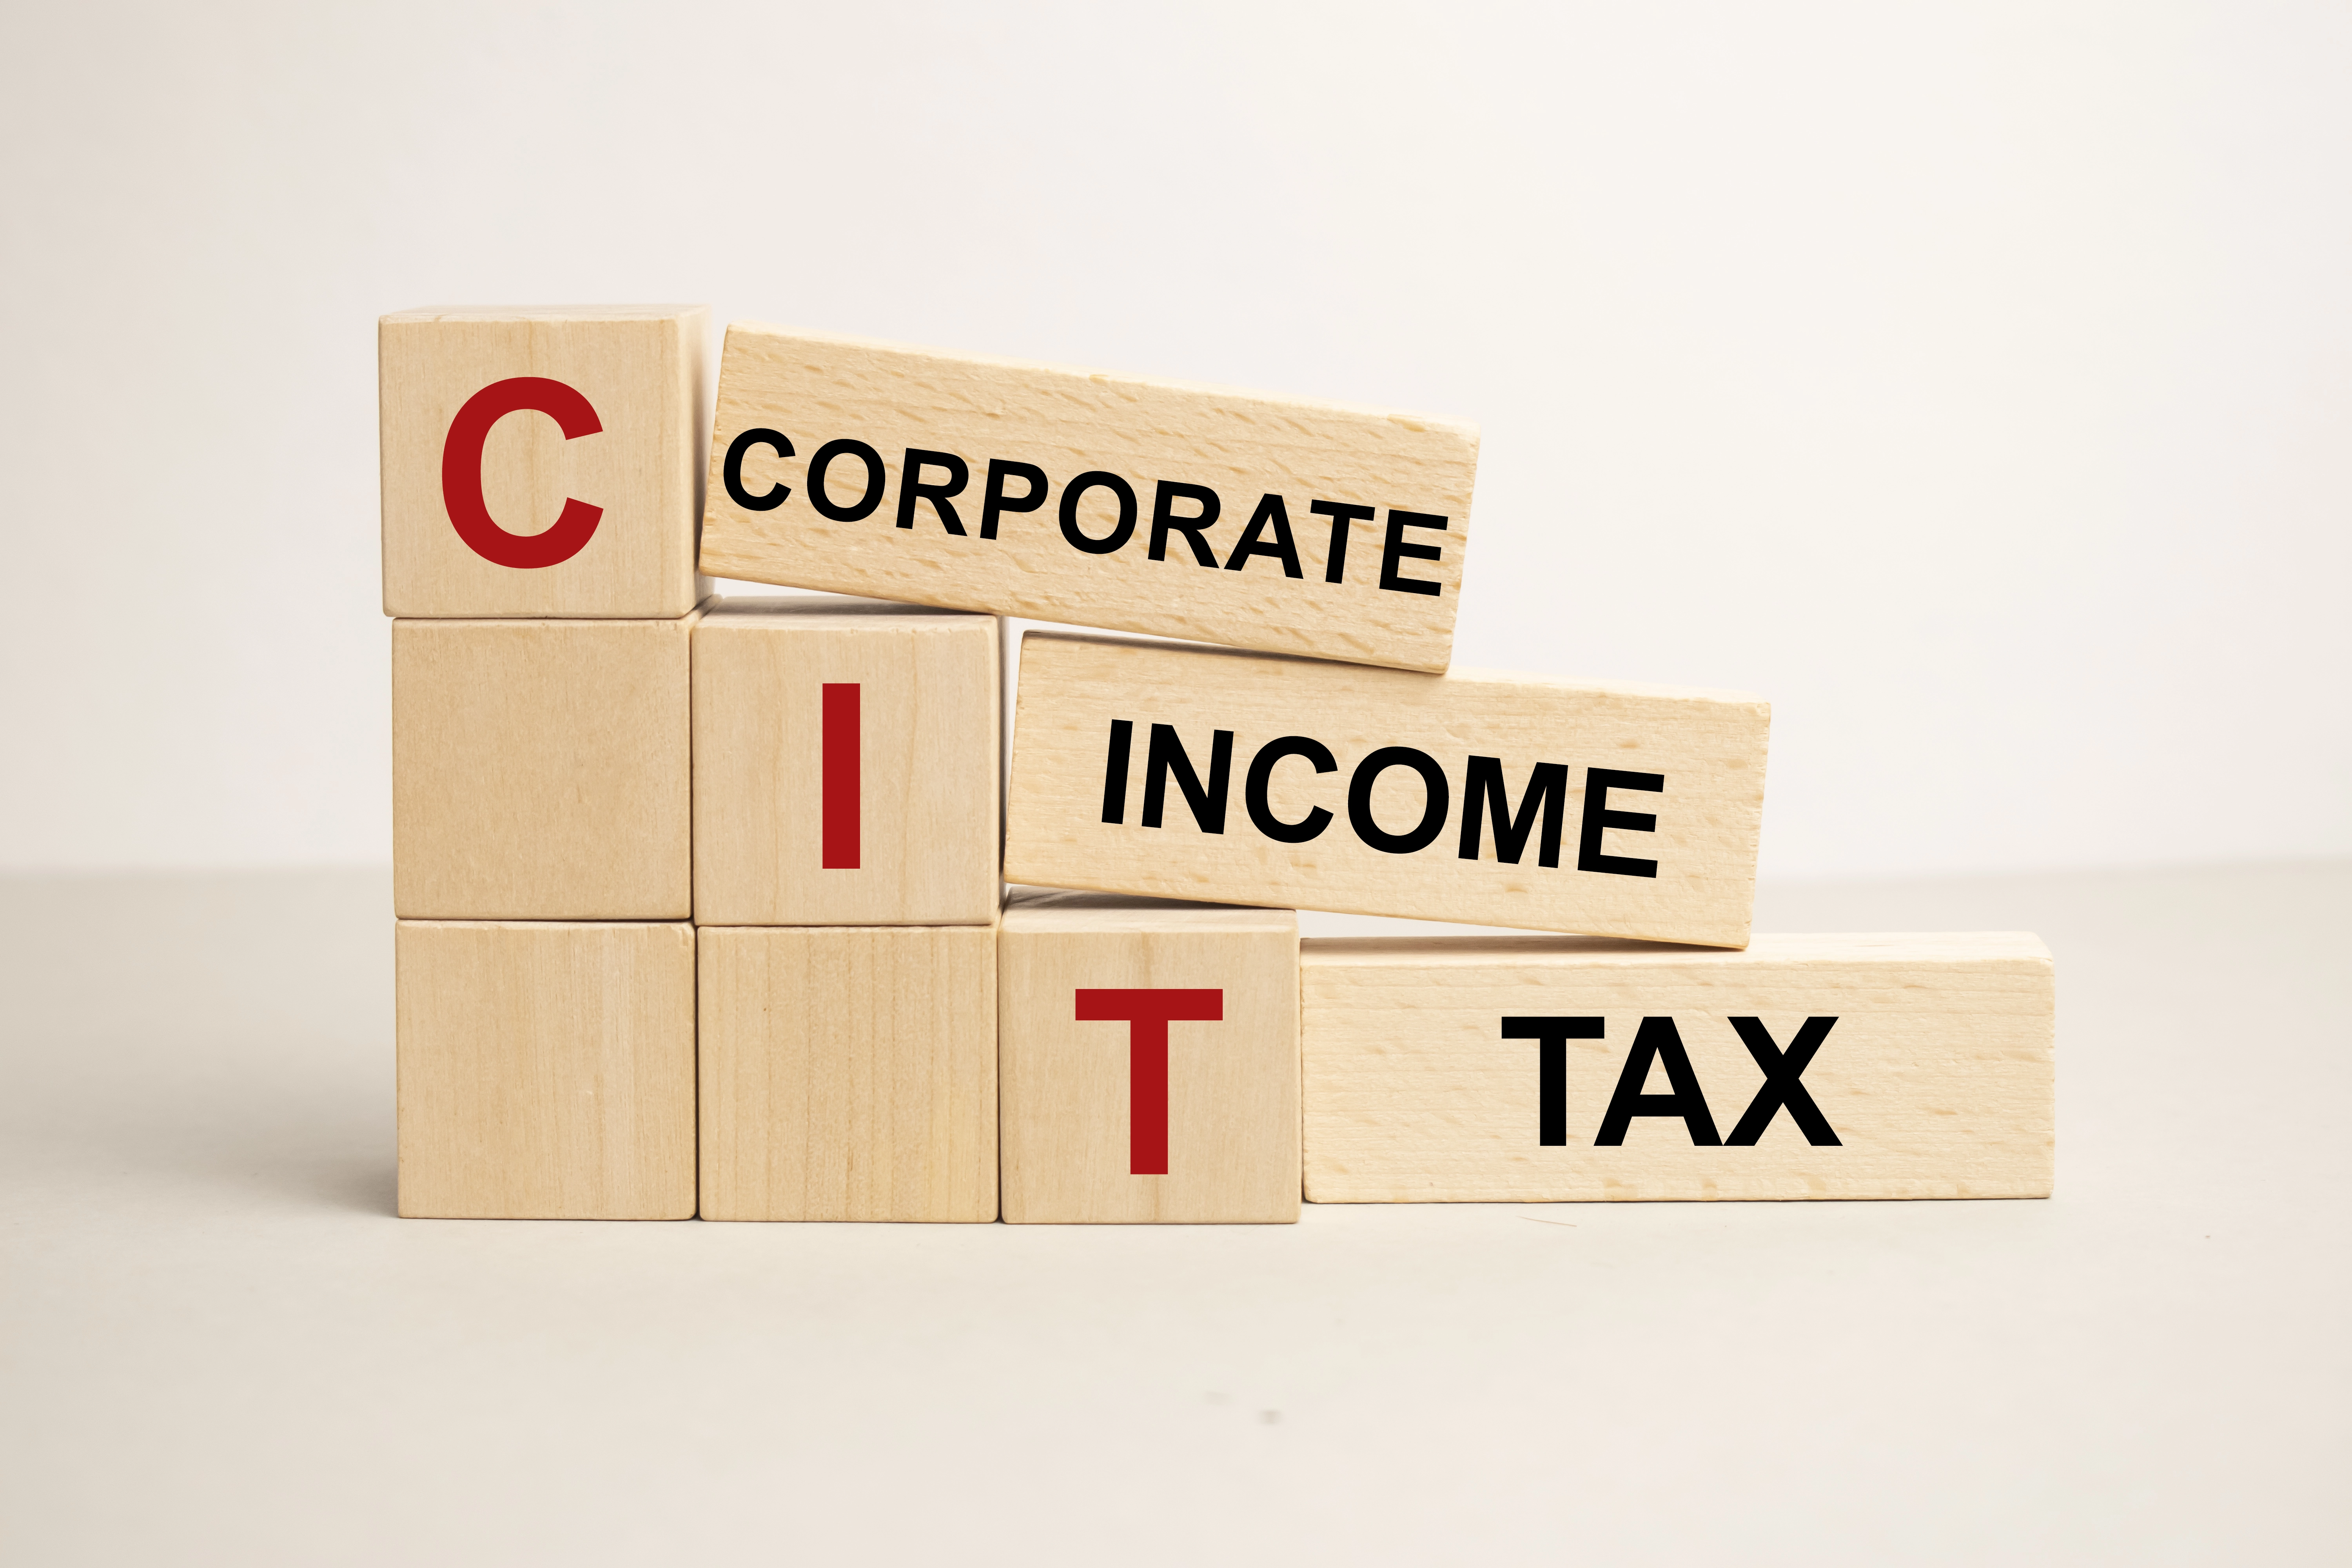 image showing the words corporate income tax